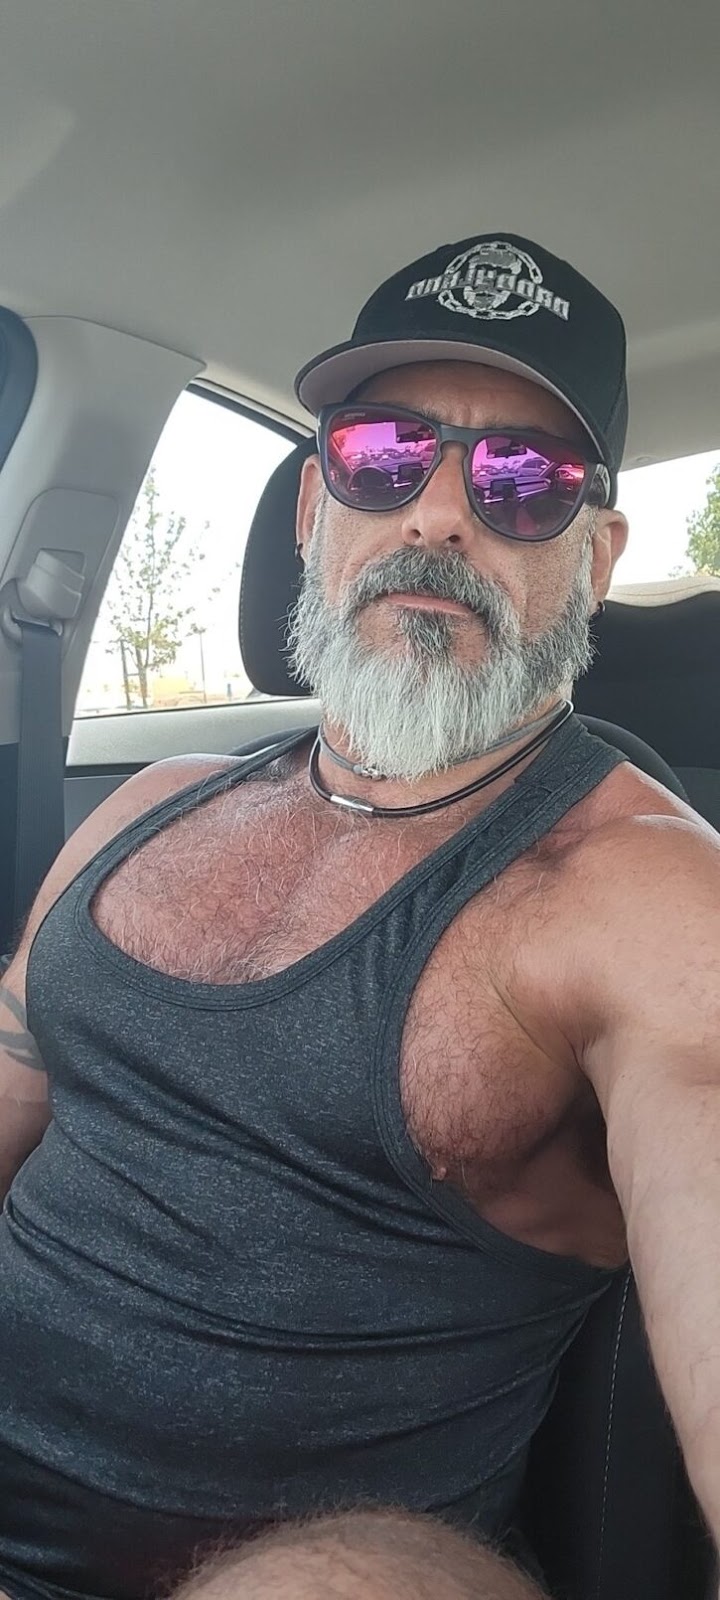 Lawson James taking a selfie in the car in a tight grey tank top and his hairy nipple poking out the side of the shirt